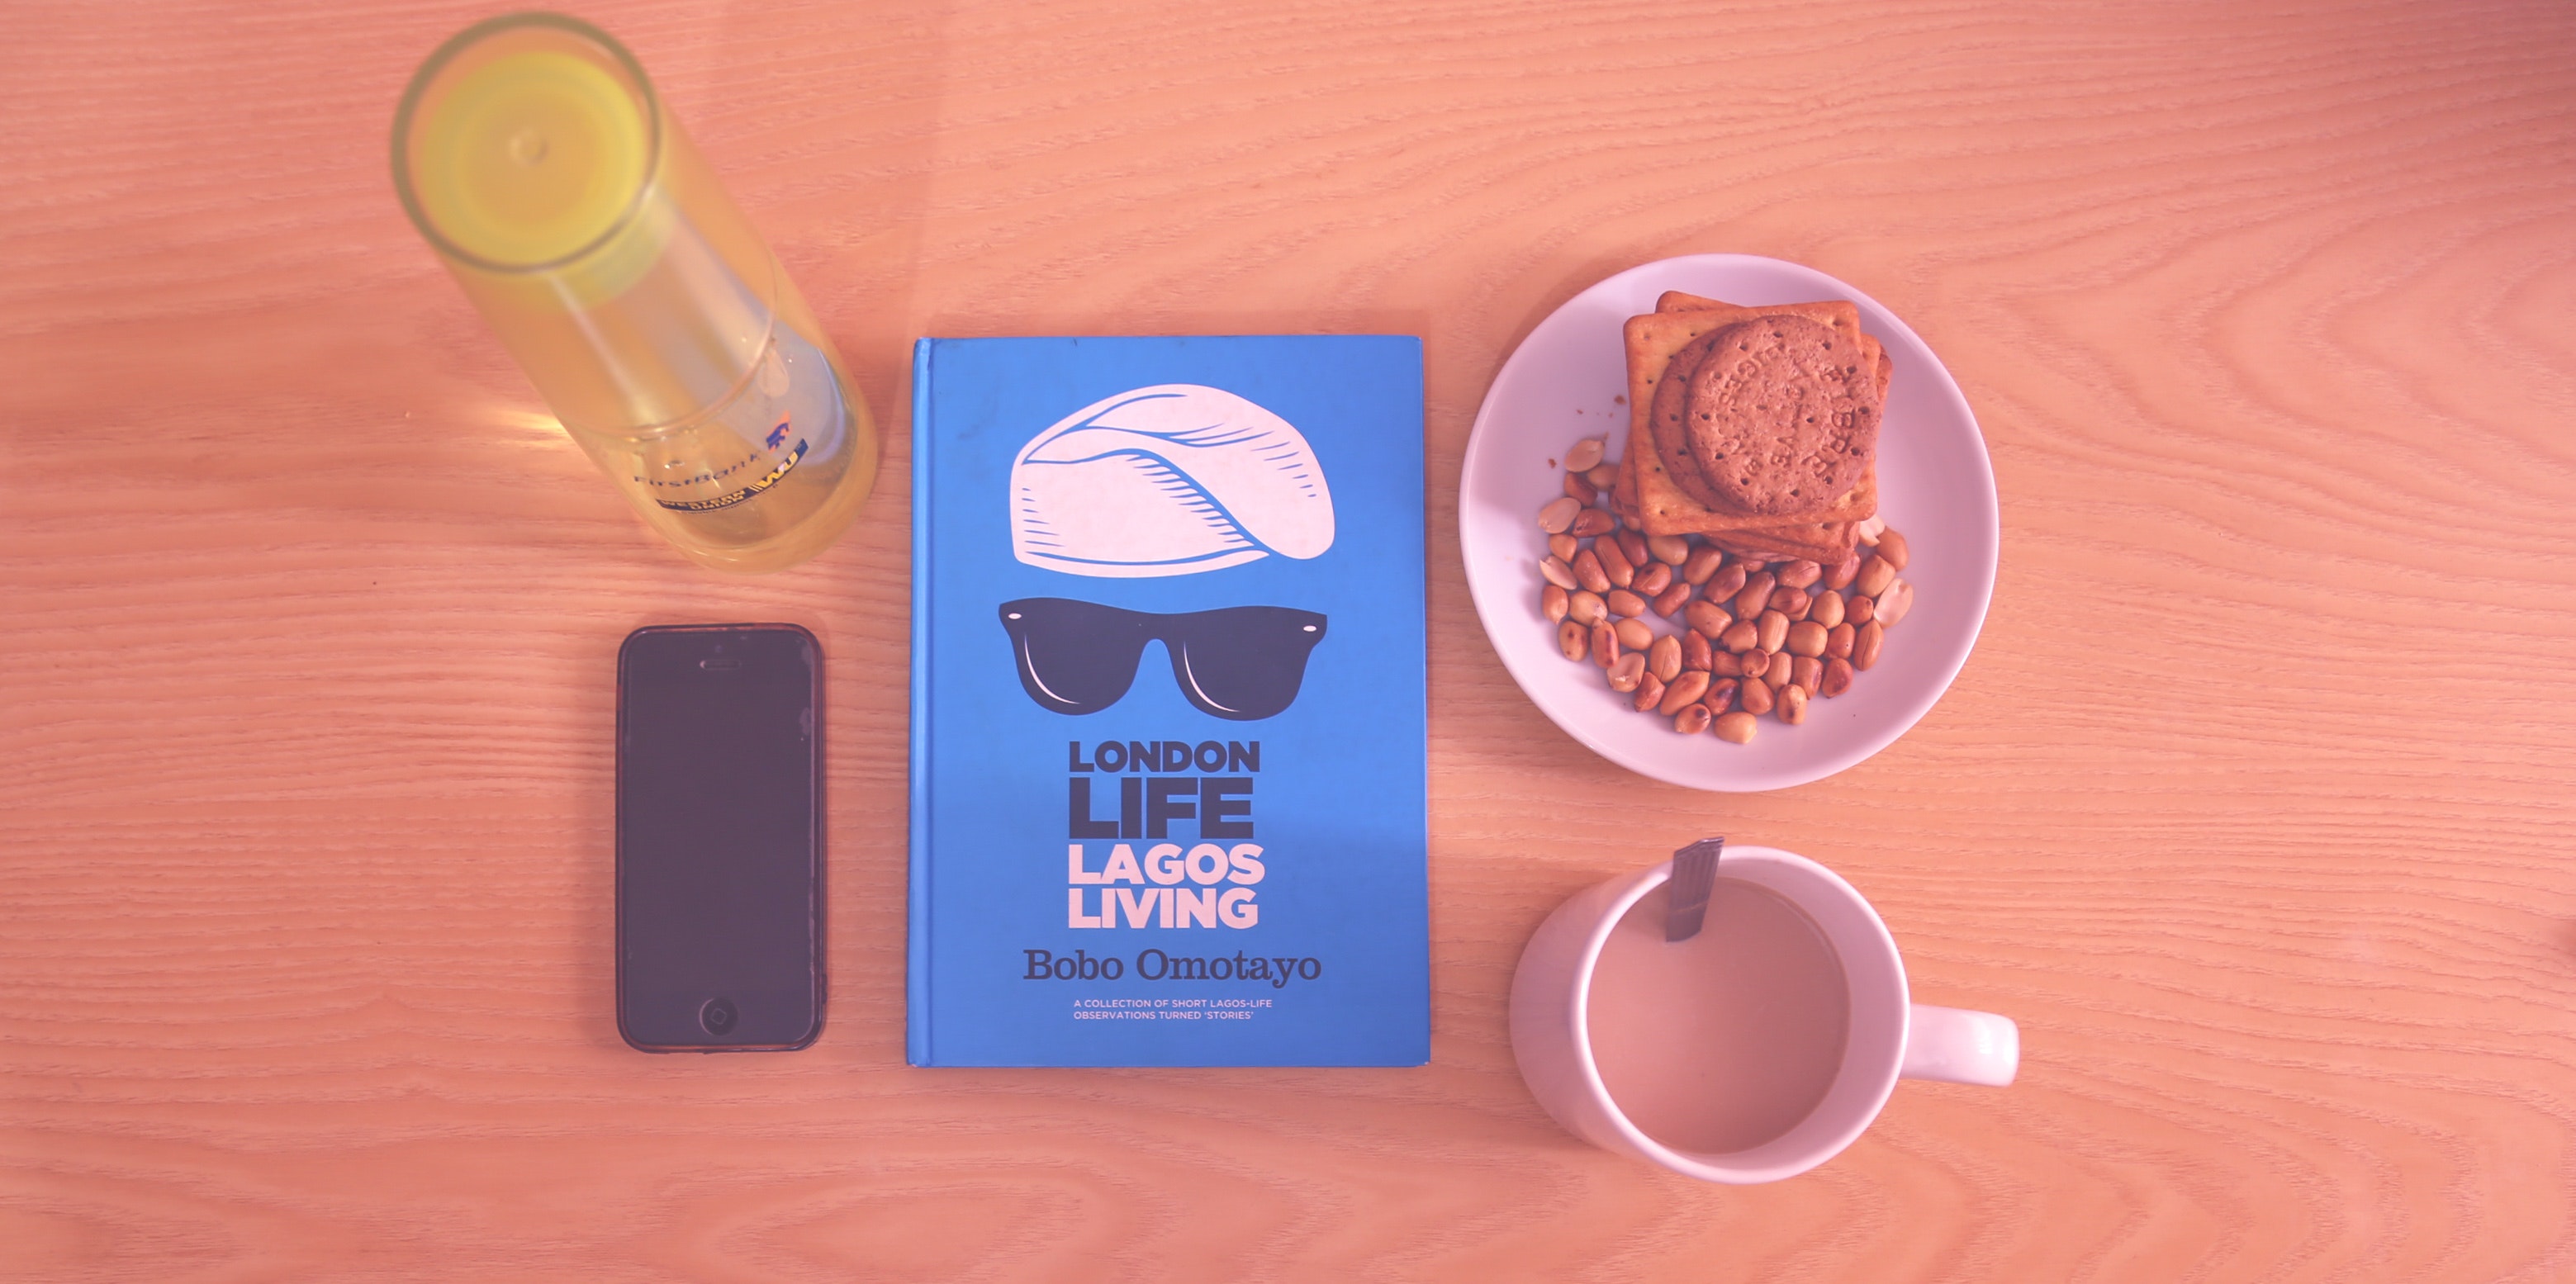 Peanuts and biscuits in white ceramic plate beside white ceramic mug near lagos living book photo